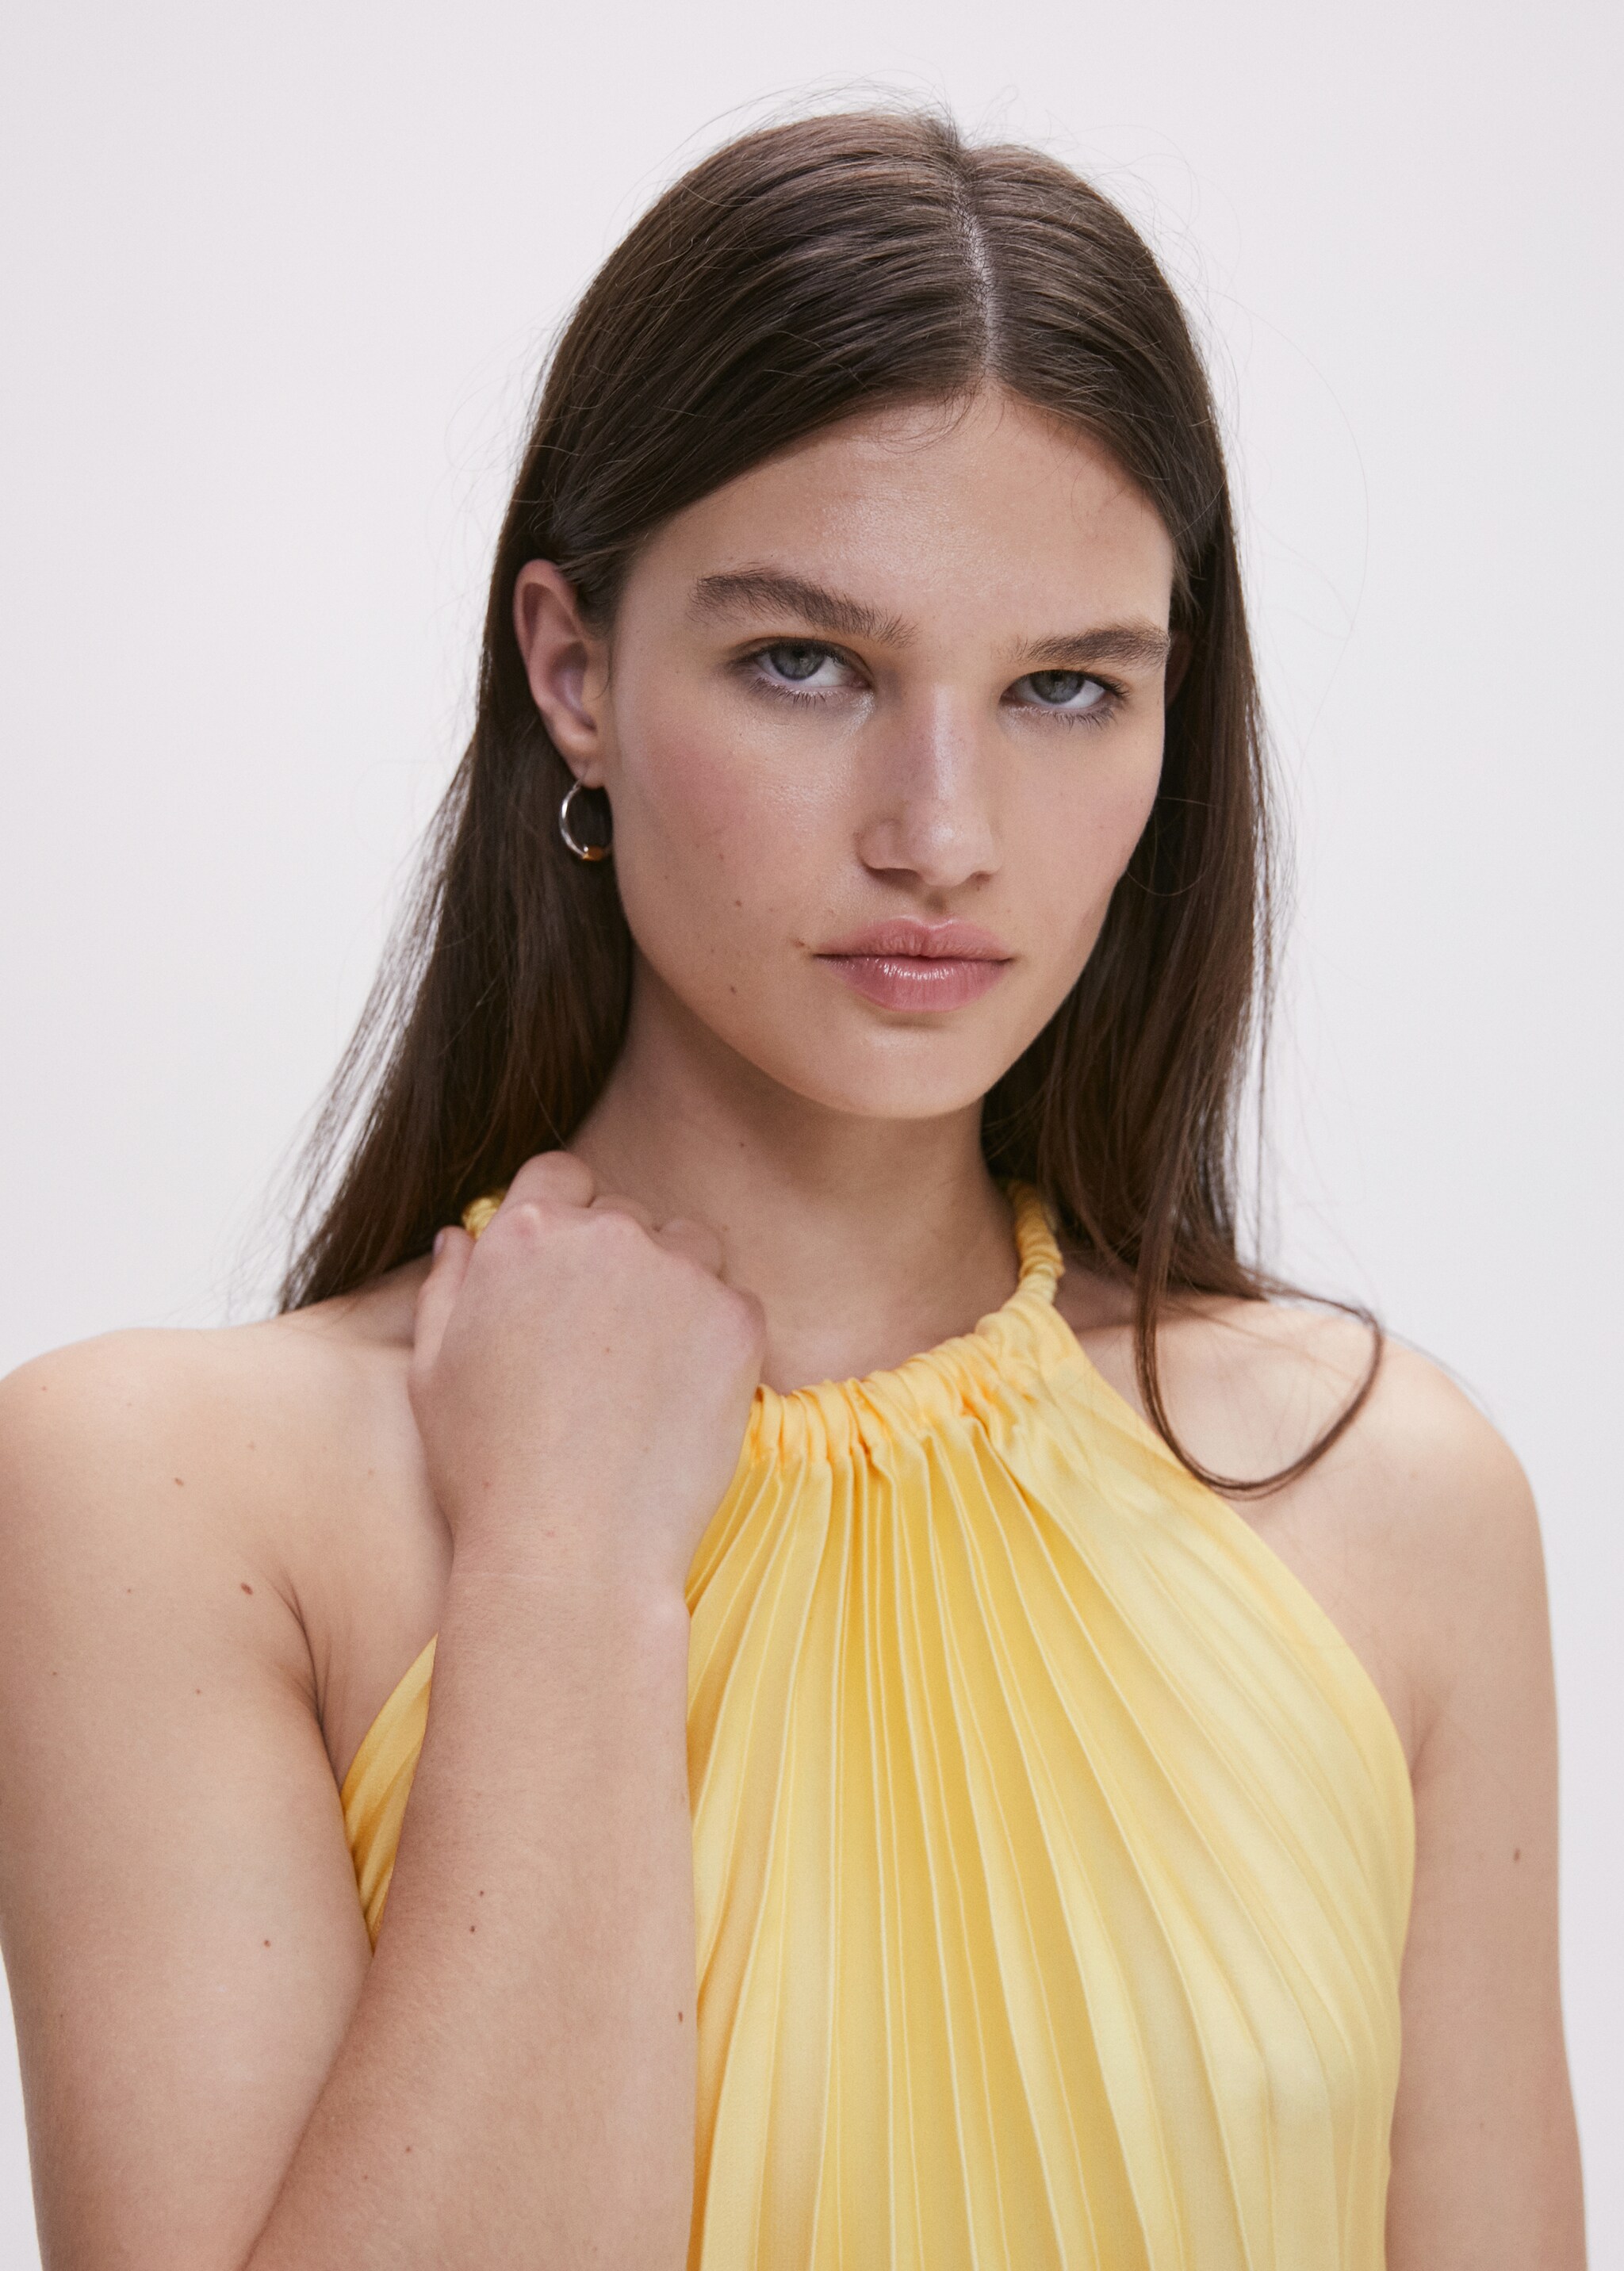 Pleated halter neck dress - Details of the article 1